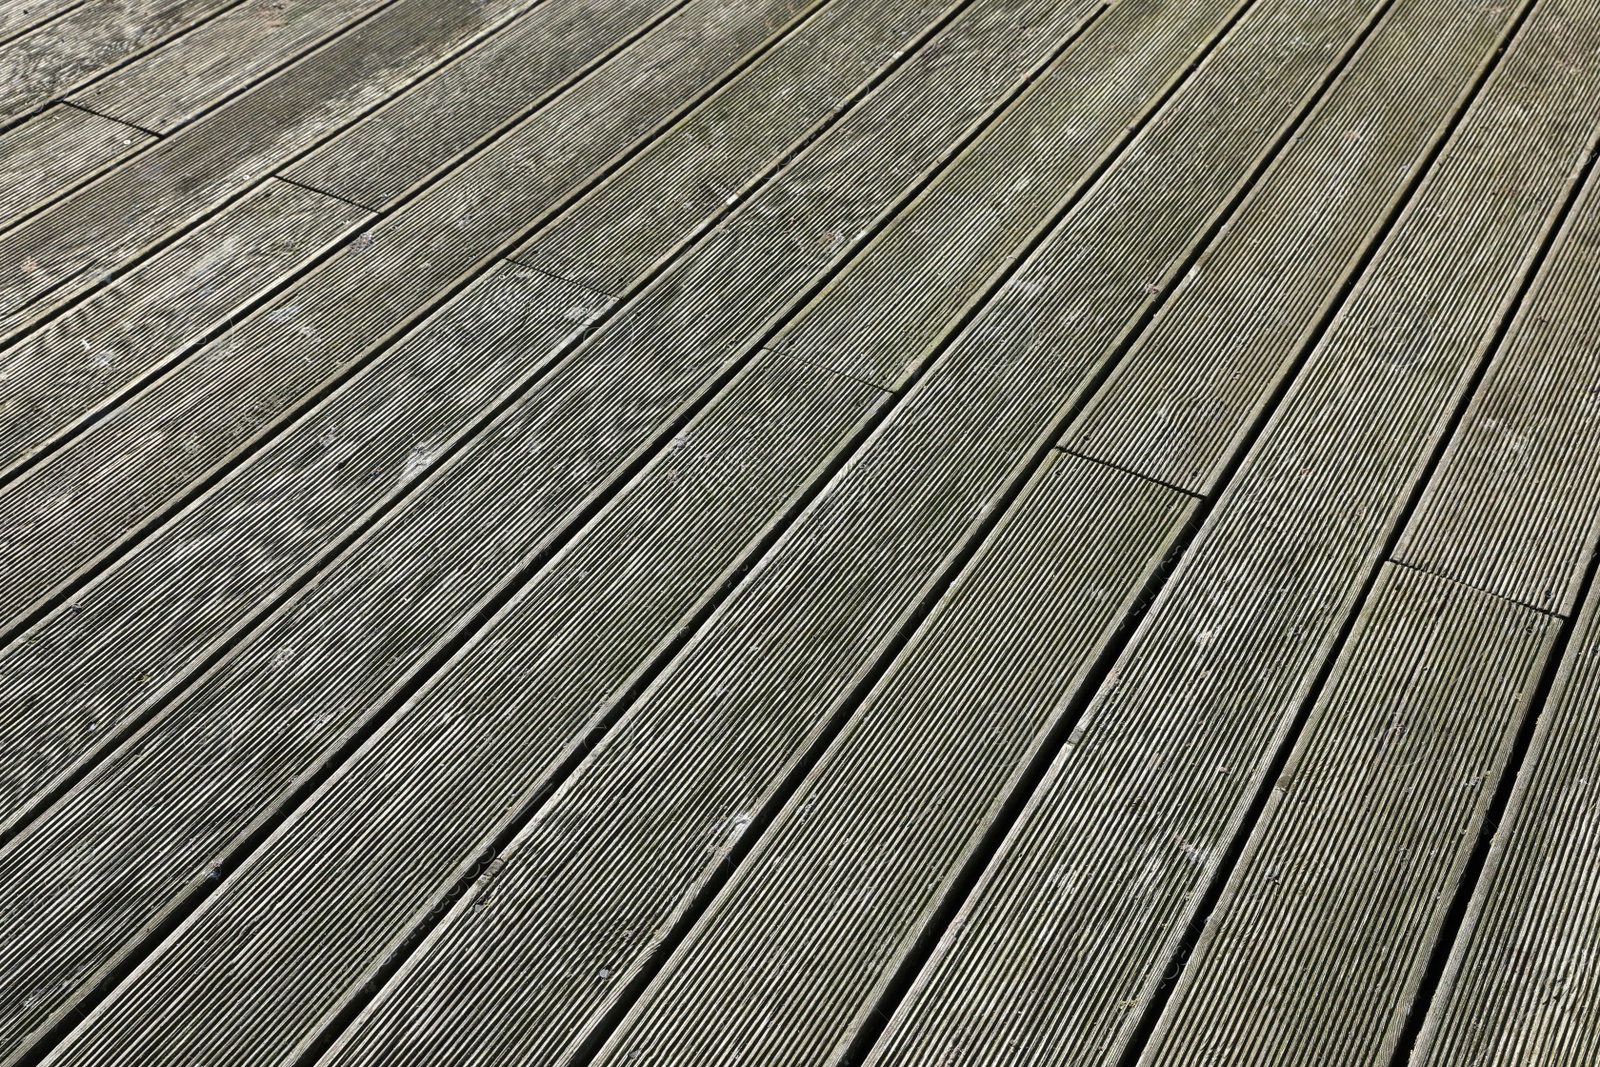 Photo of Texture of wooden terrace as background, closeup view